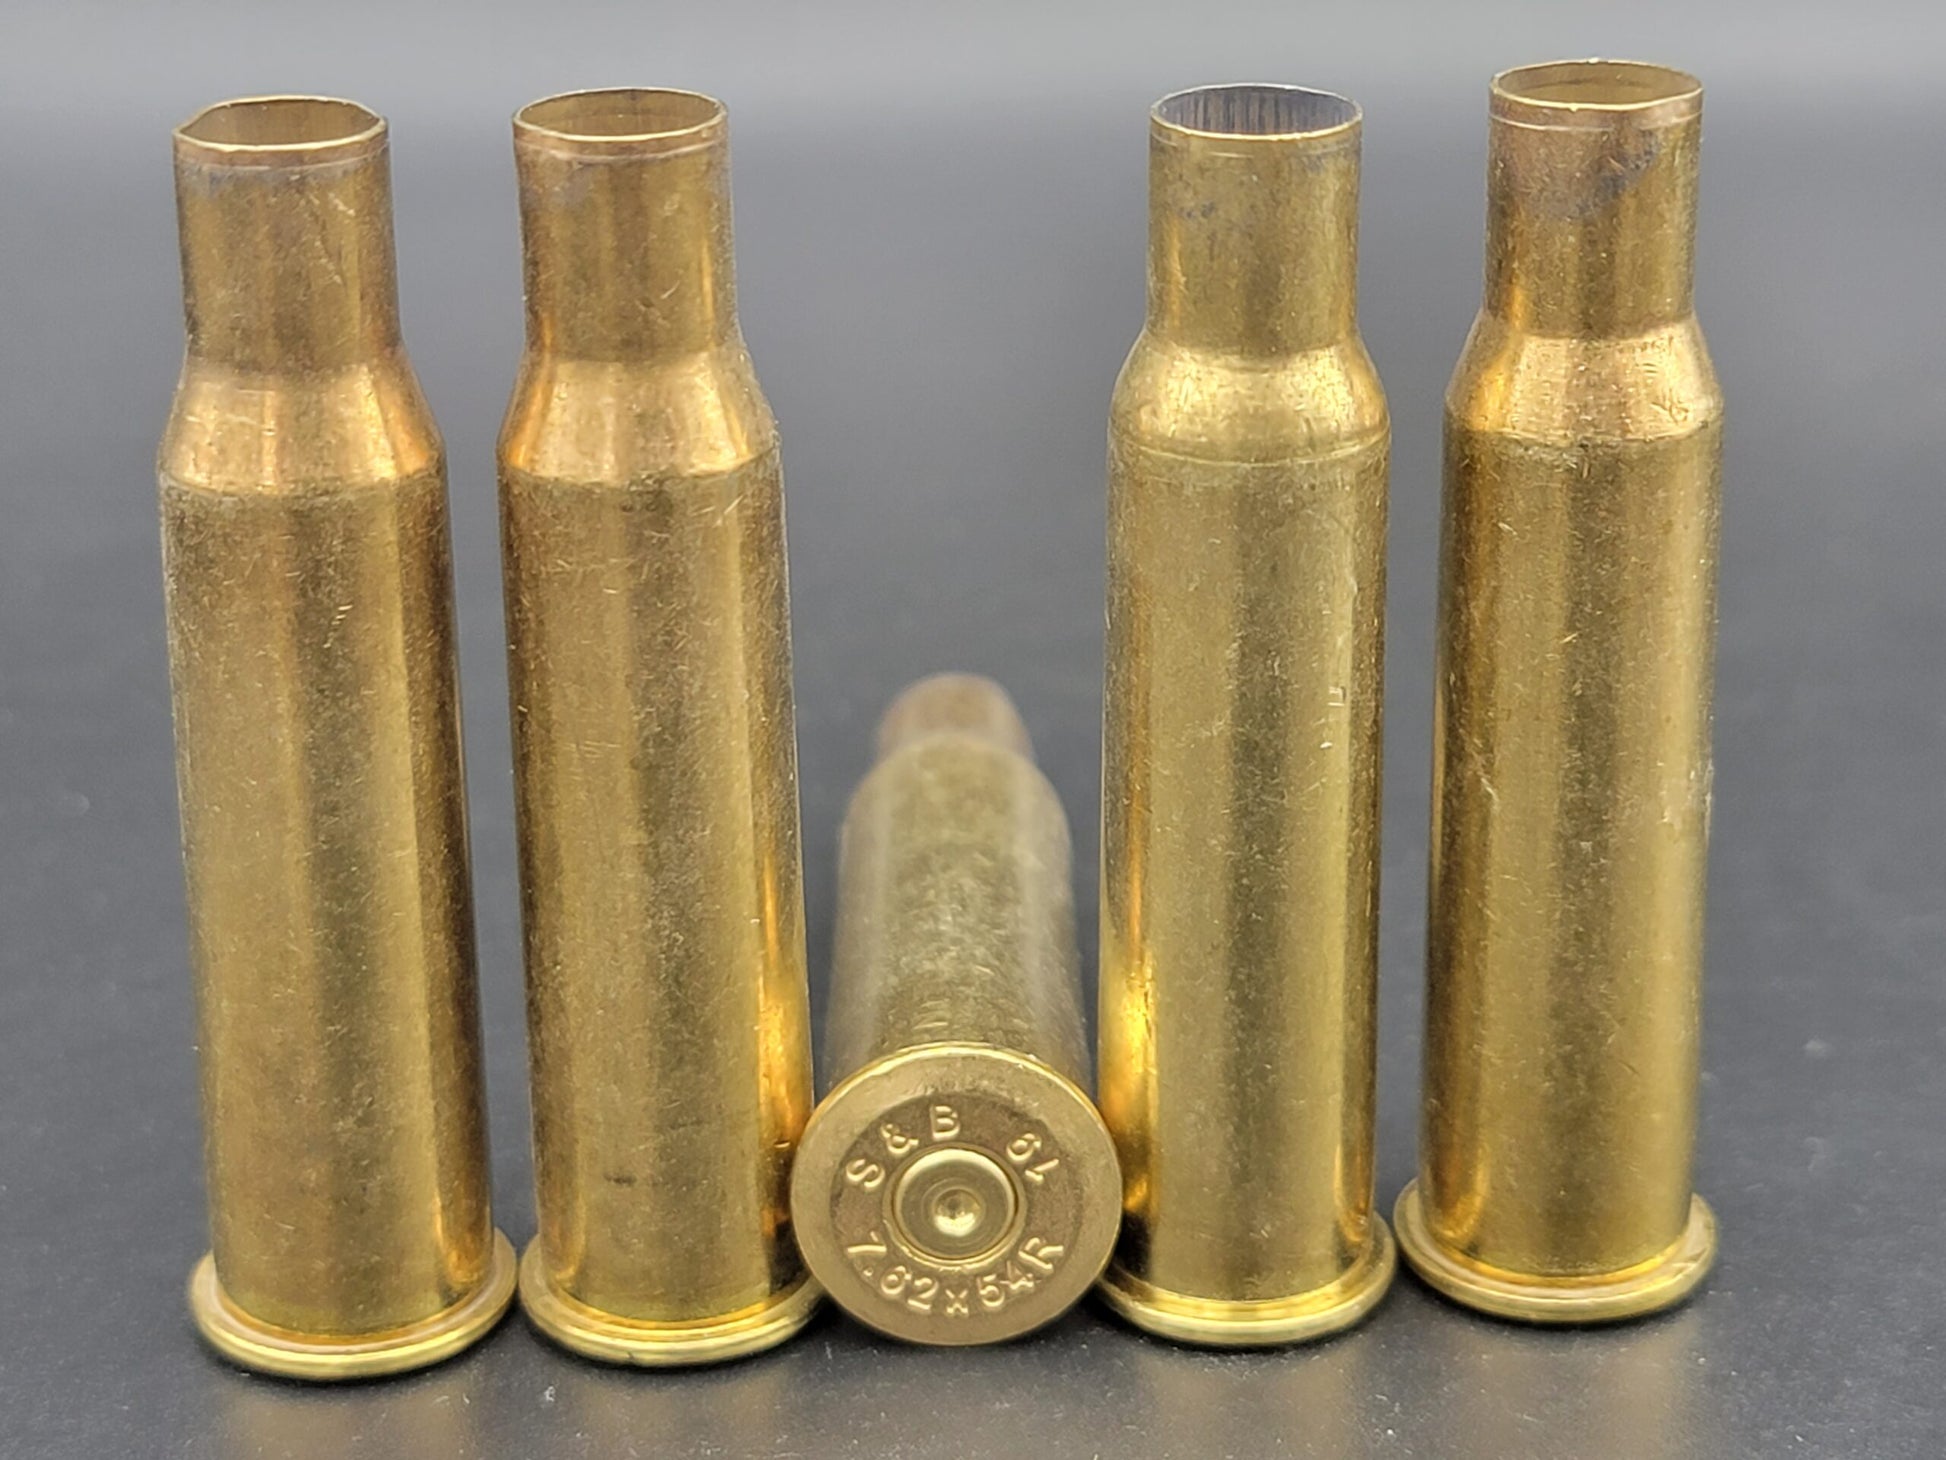 7.62x54R once fired rifle brass. Hand sorted from reputable indoor/military ranges for reloading. Reliable spent casings for precision shooting.